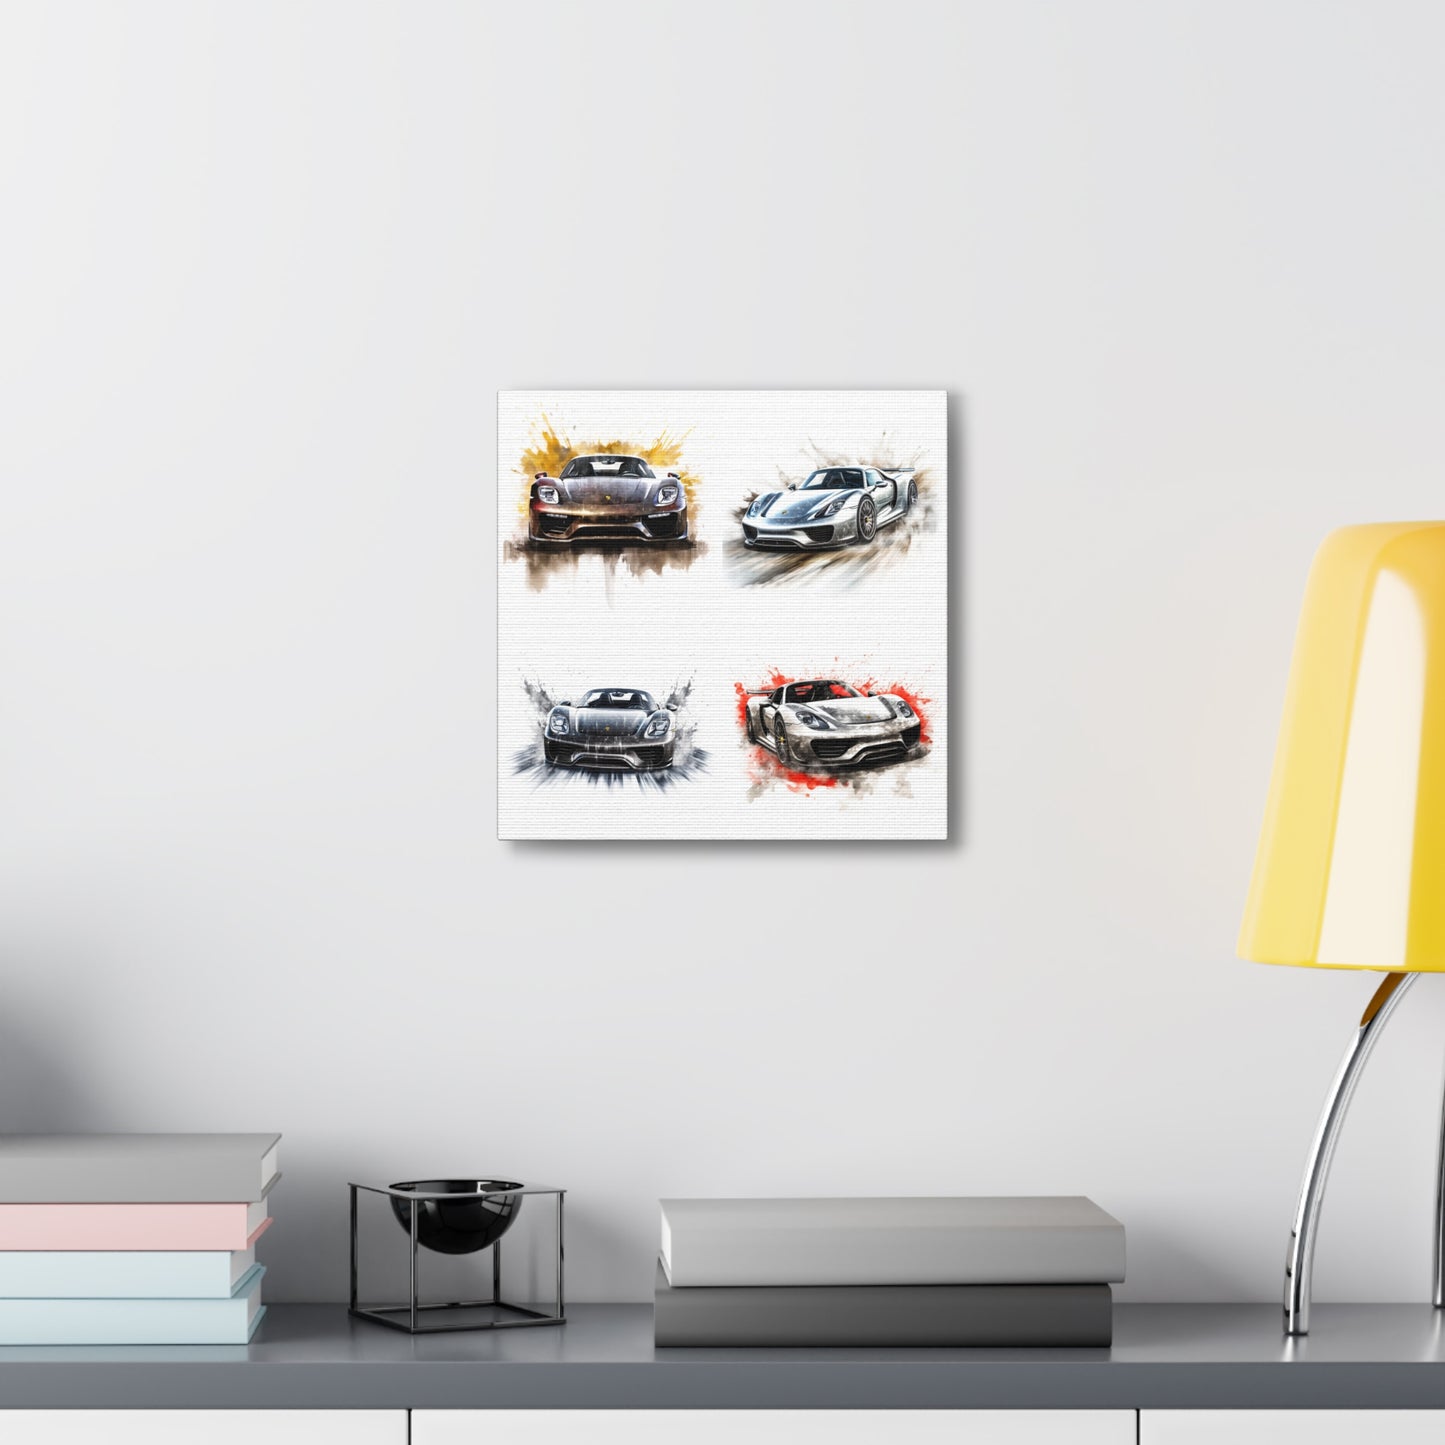 Canvas Gallery Wraps 918 Spyder white background driving fast with water splashing 4 pack